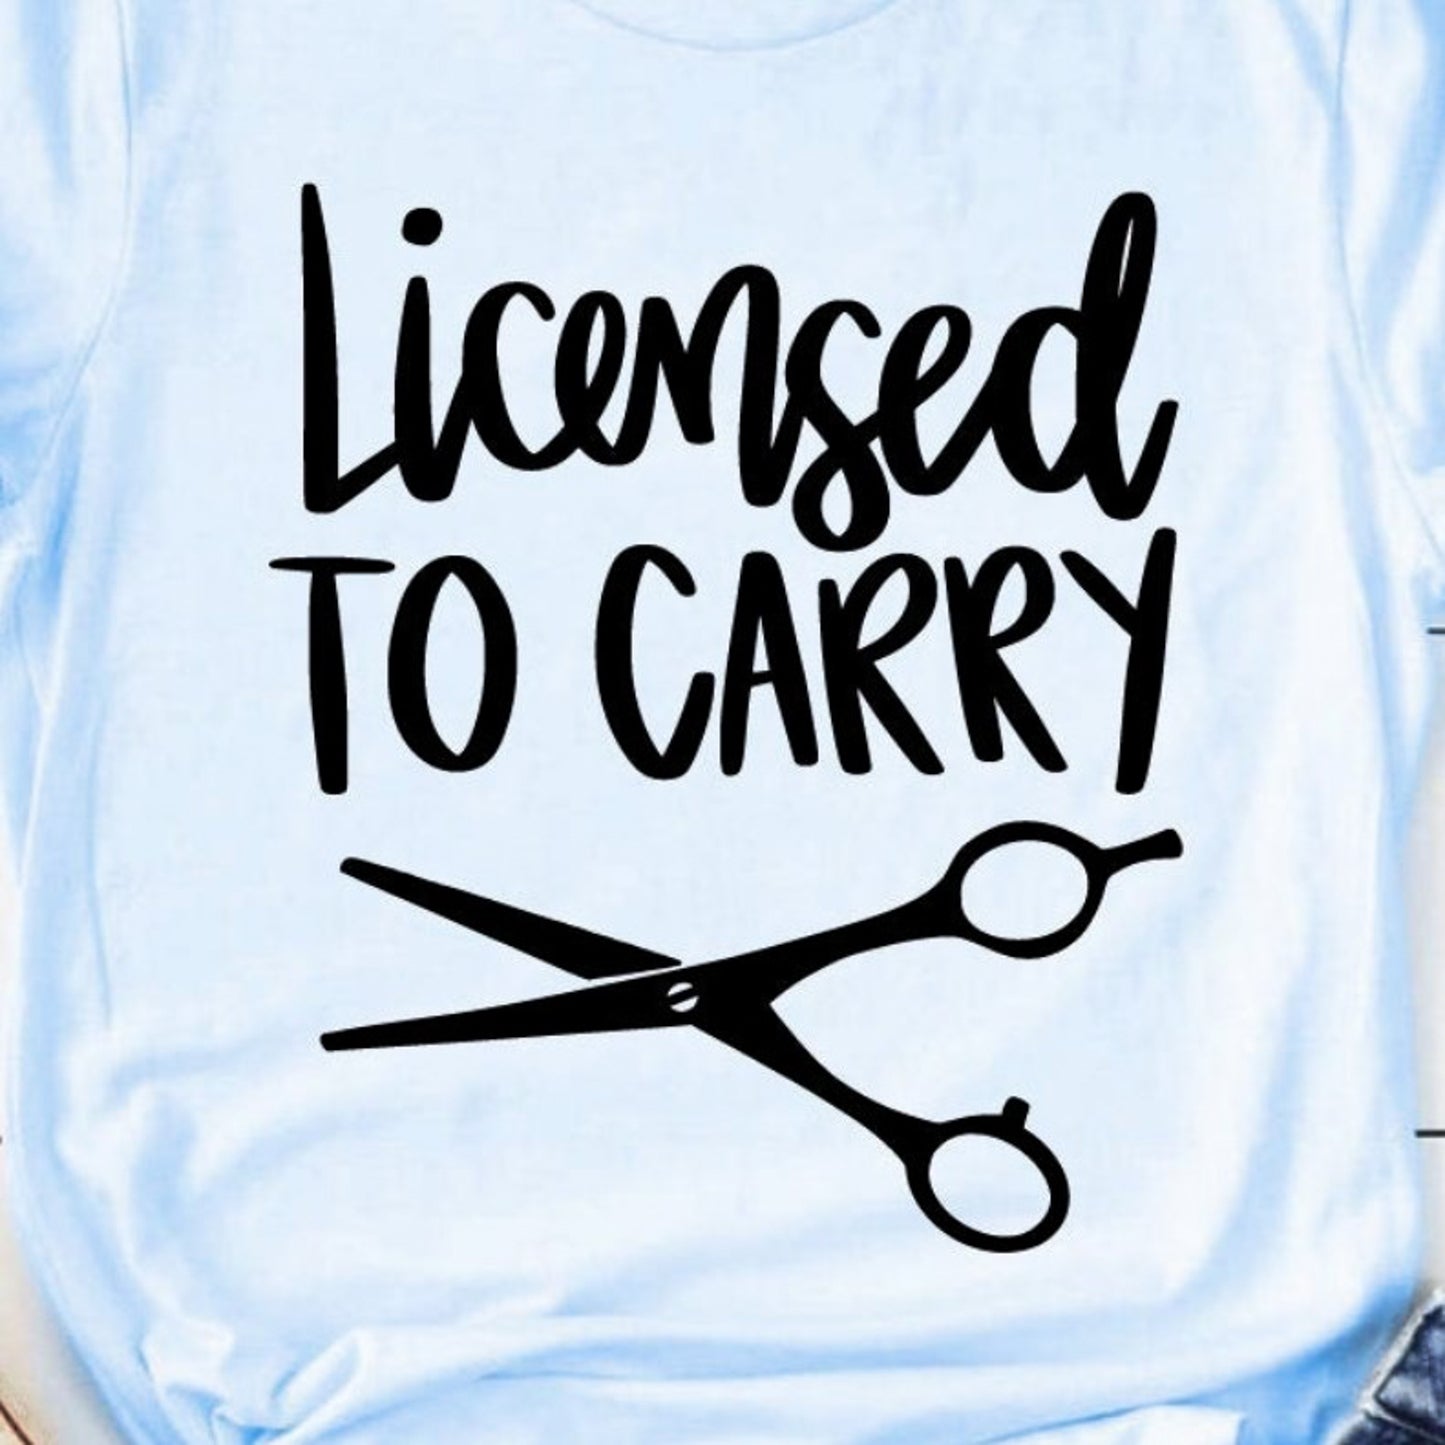 Licensed To Carry With Shears Tee